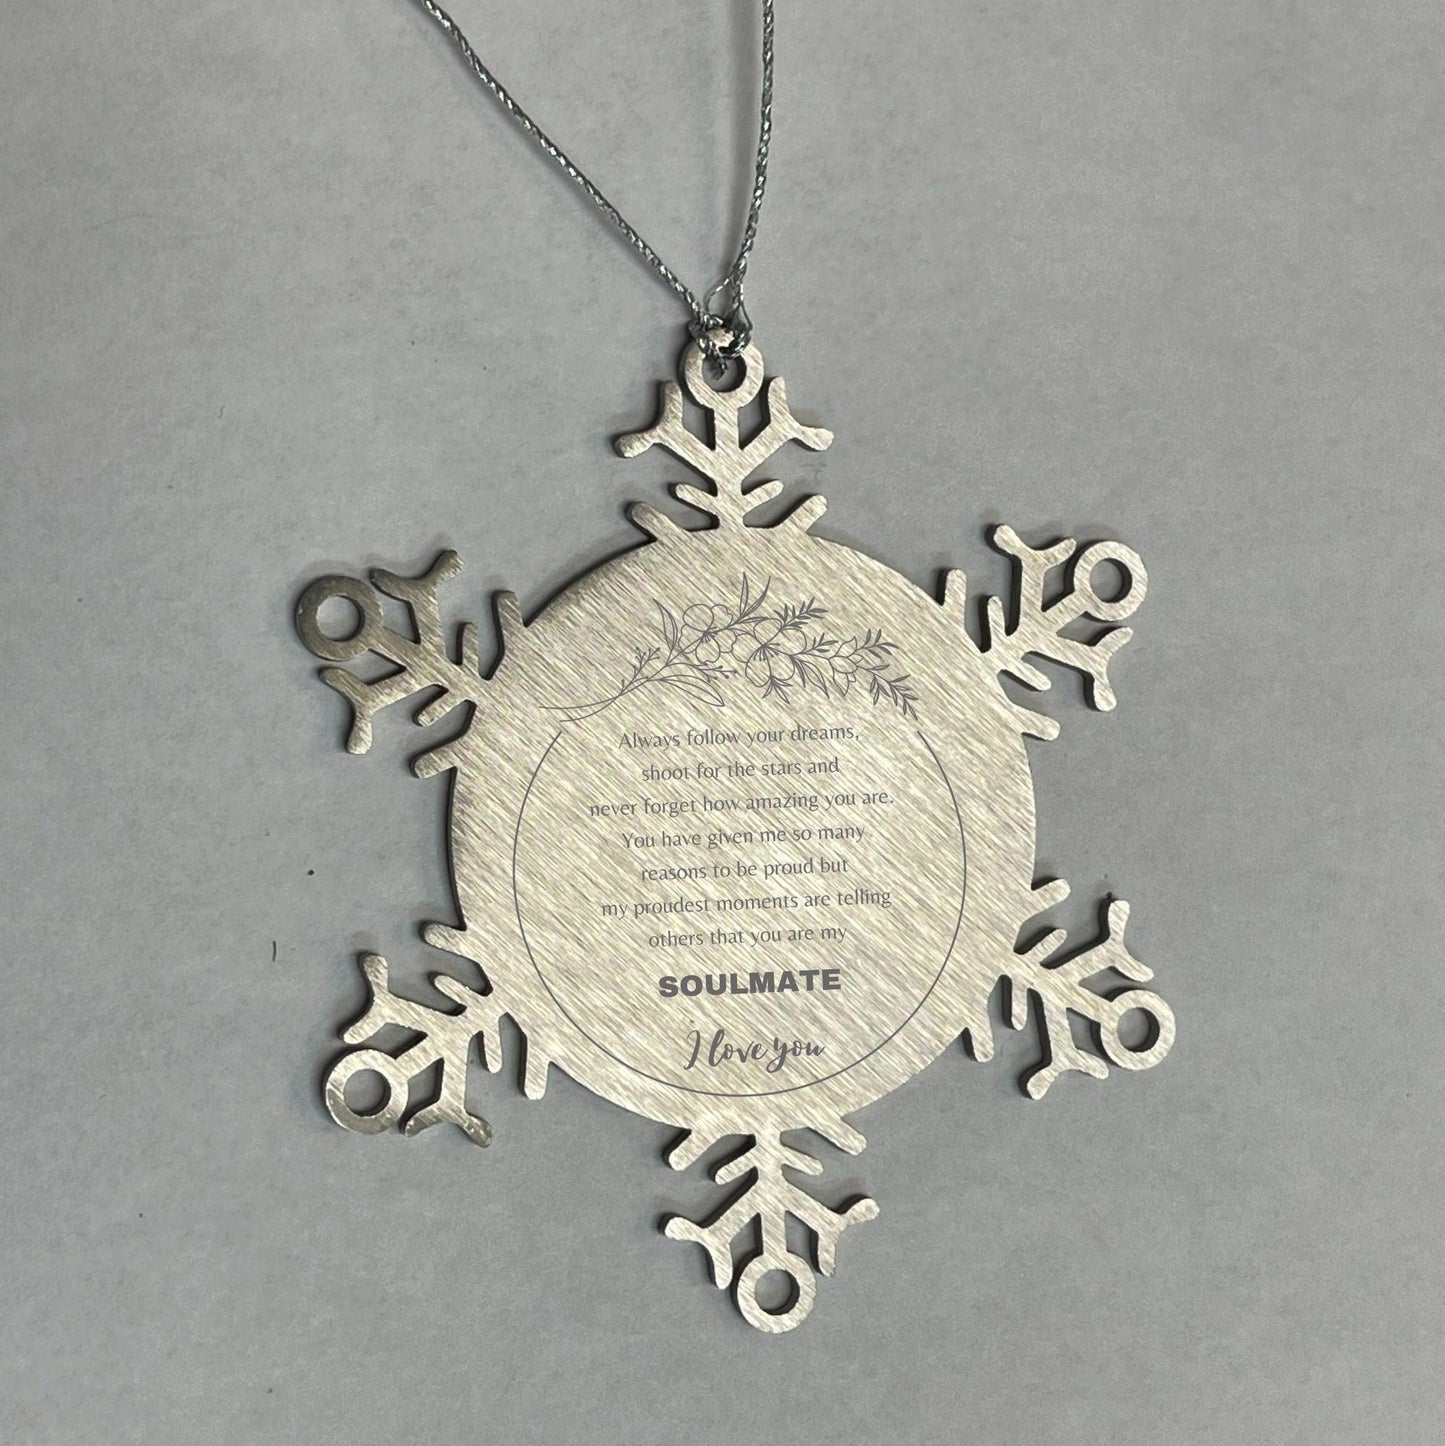 Motivational Soulmate Snowflake Engraved Ornament - Always follow your dreams, never forget how amazing you are- Birthday, Christmas Holiday Gifts - Mallard Moon Gift Shop